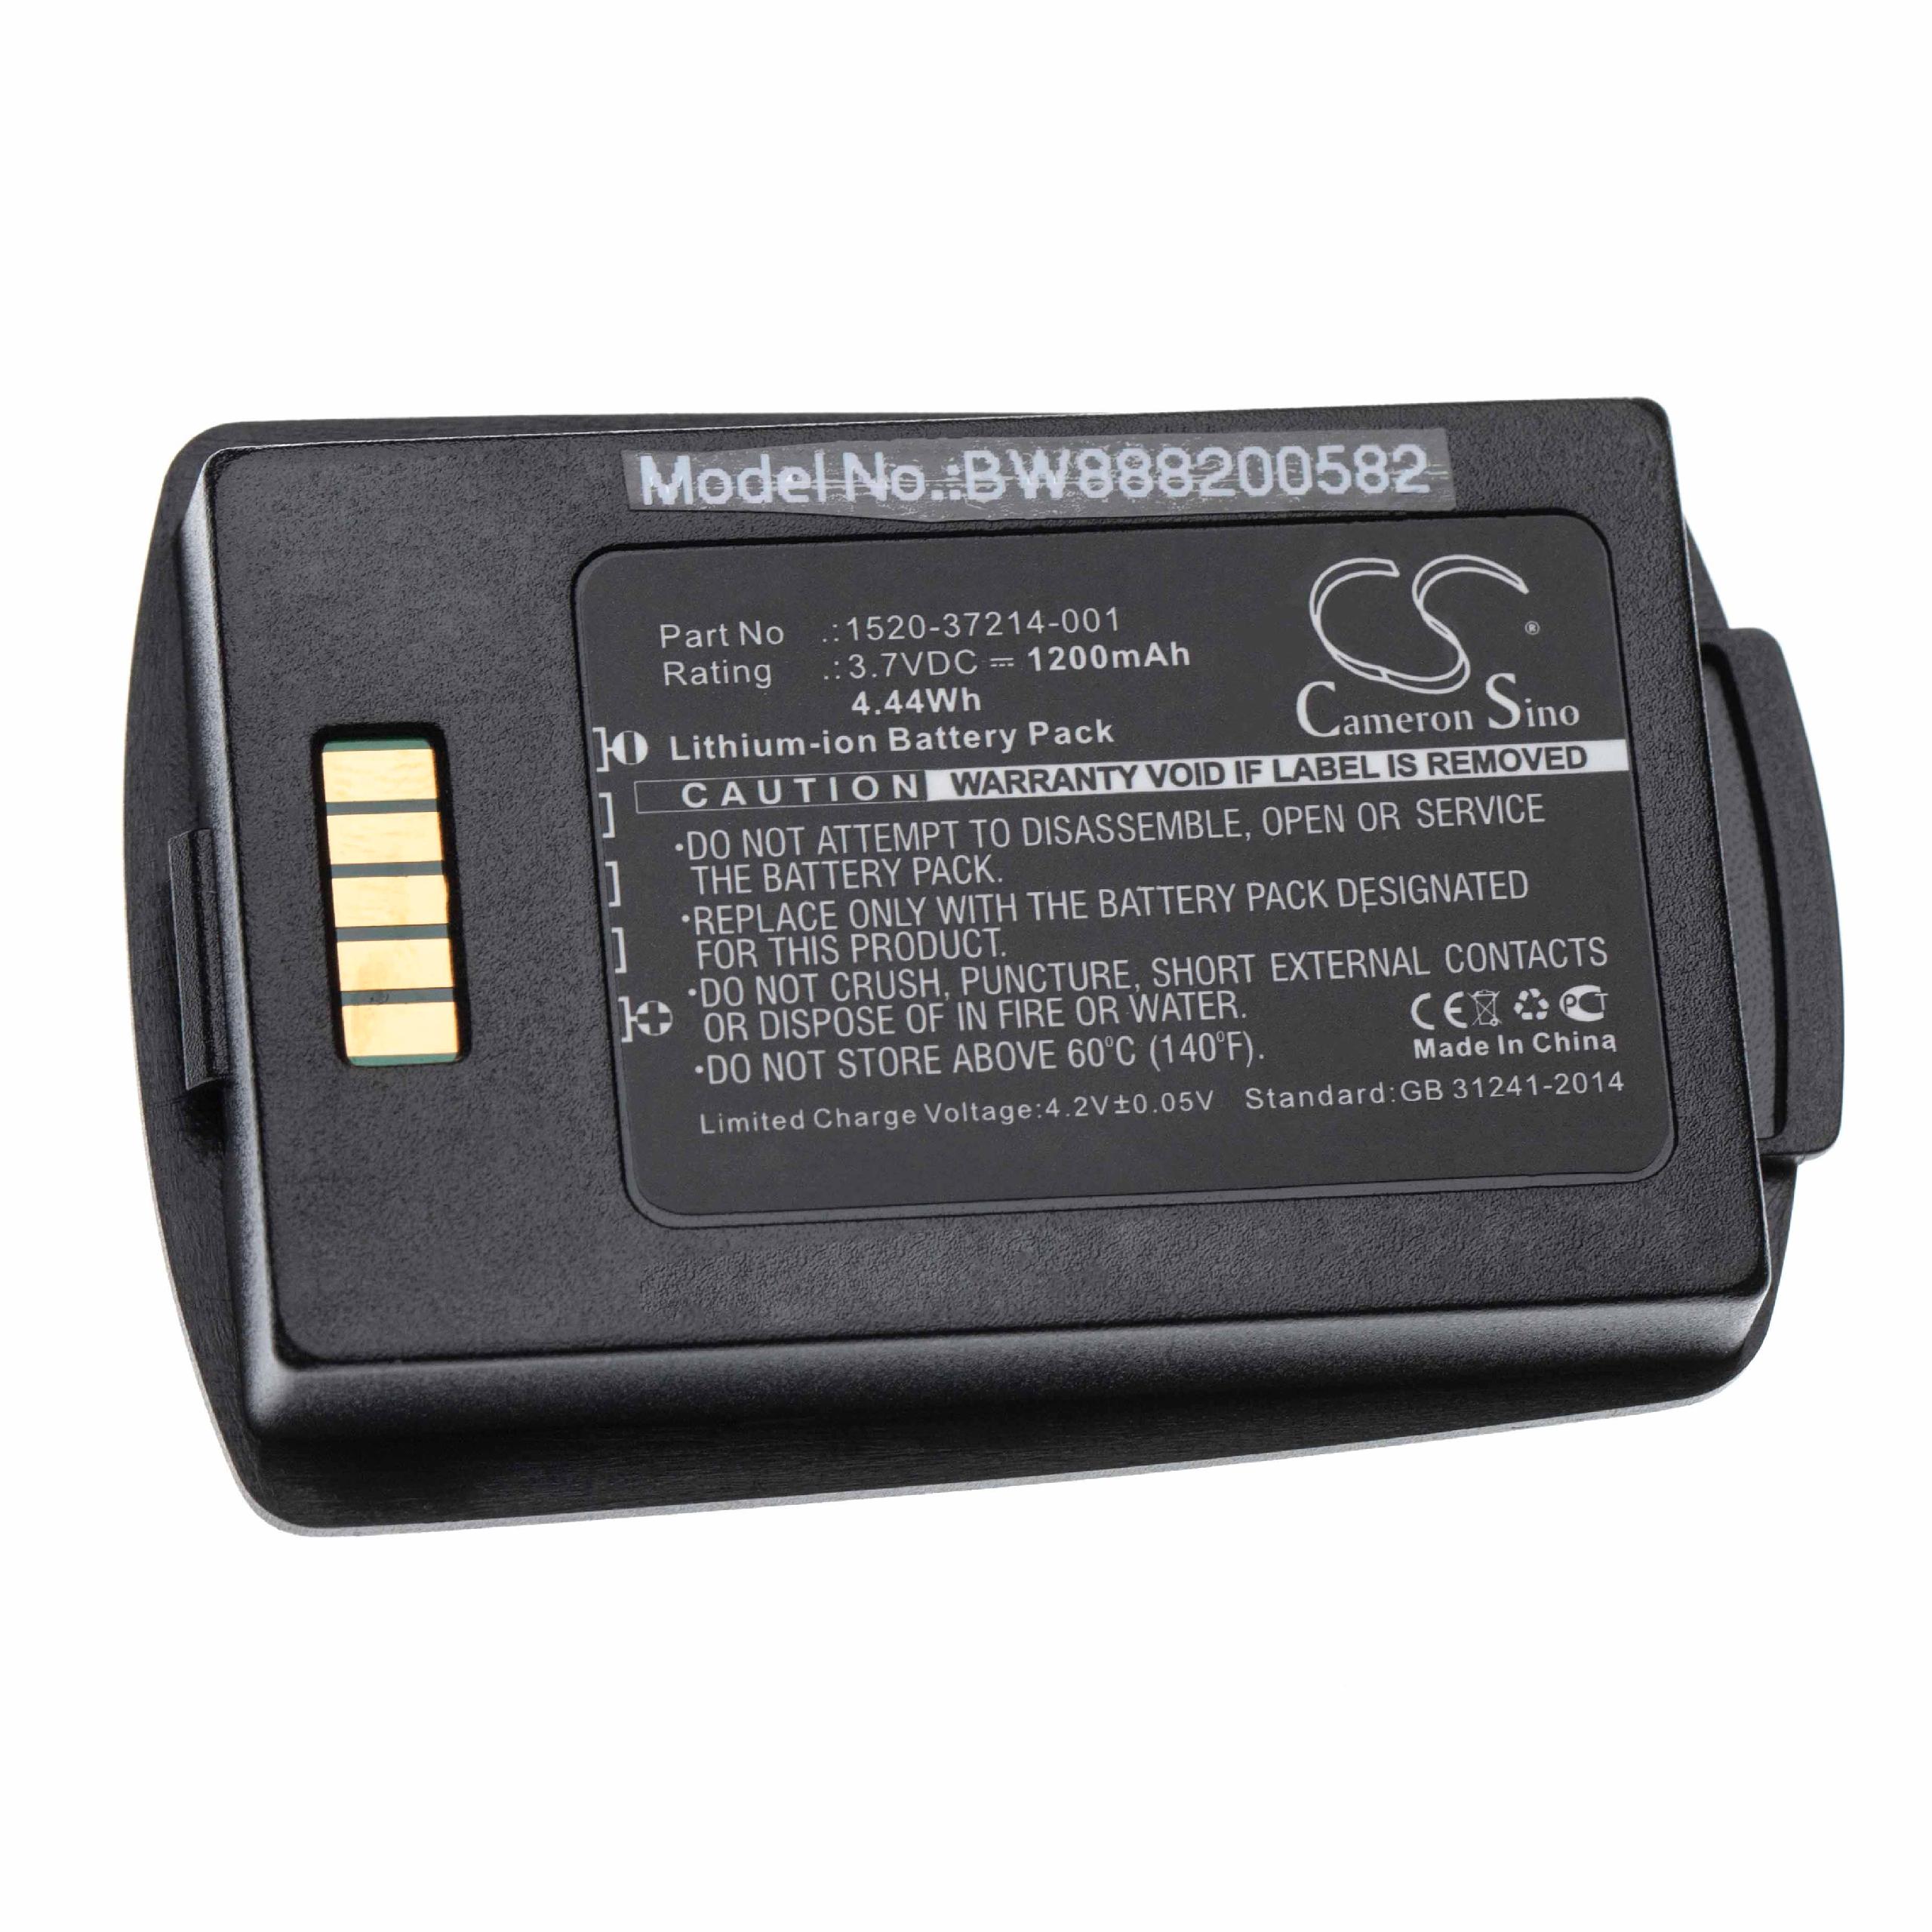 Mobile Phone Battery Replacement for Polycom / Spectralink 1520-37214-001 - 1200mAh 3.7V Li-Ion